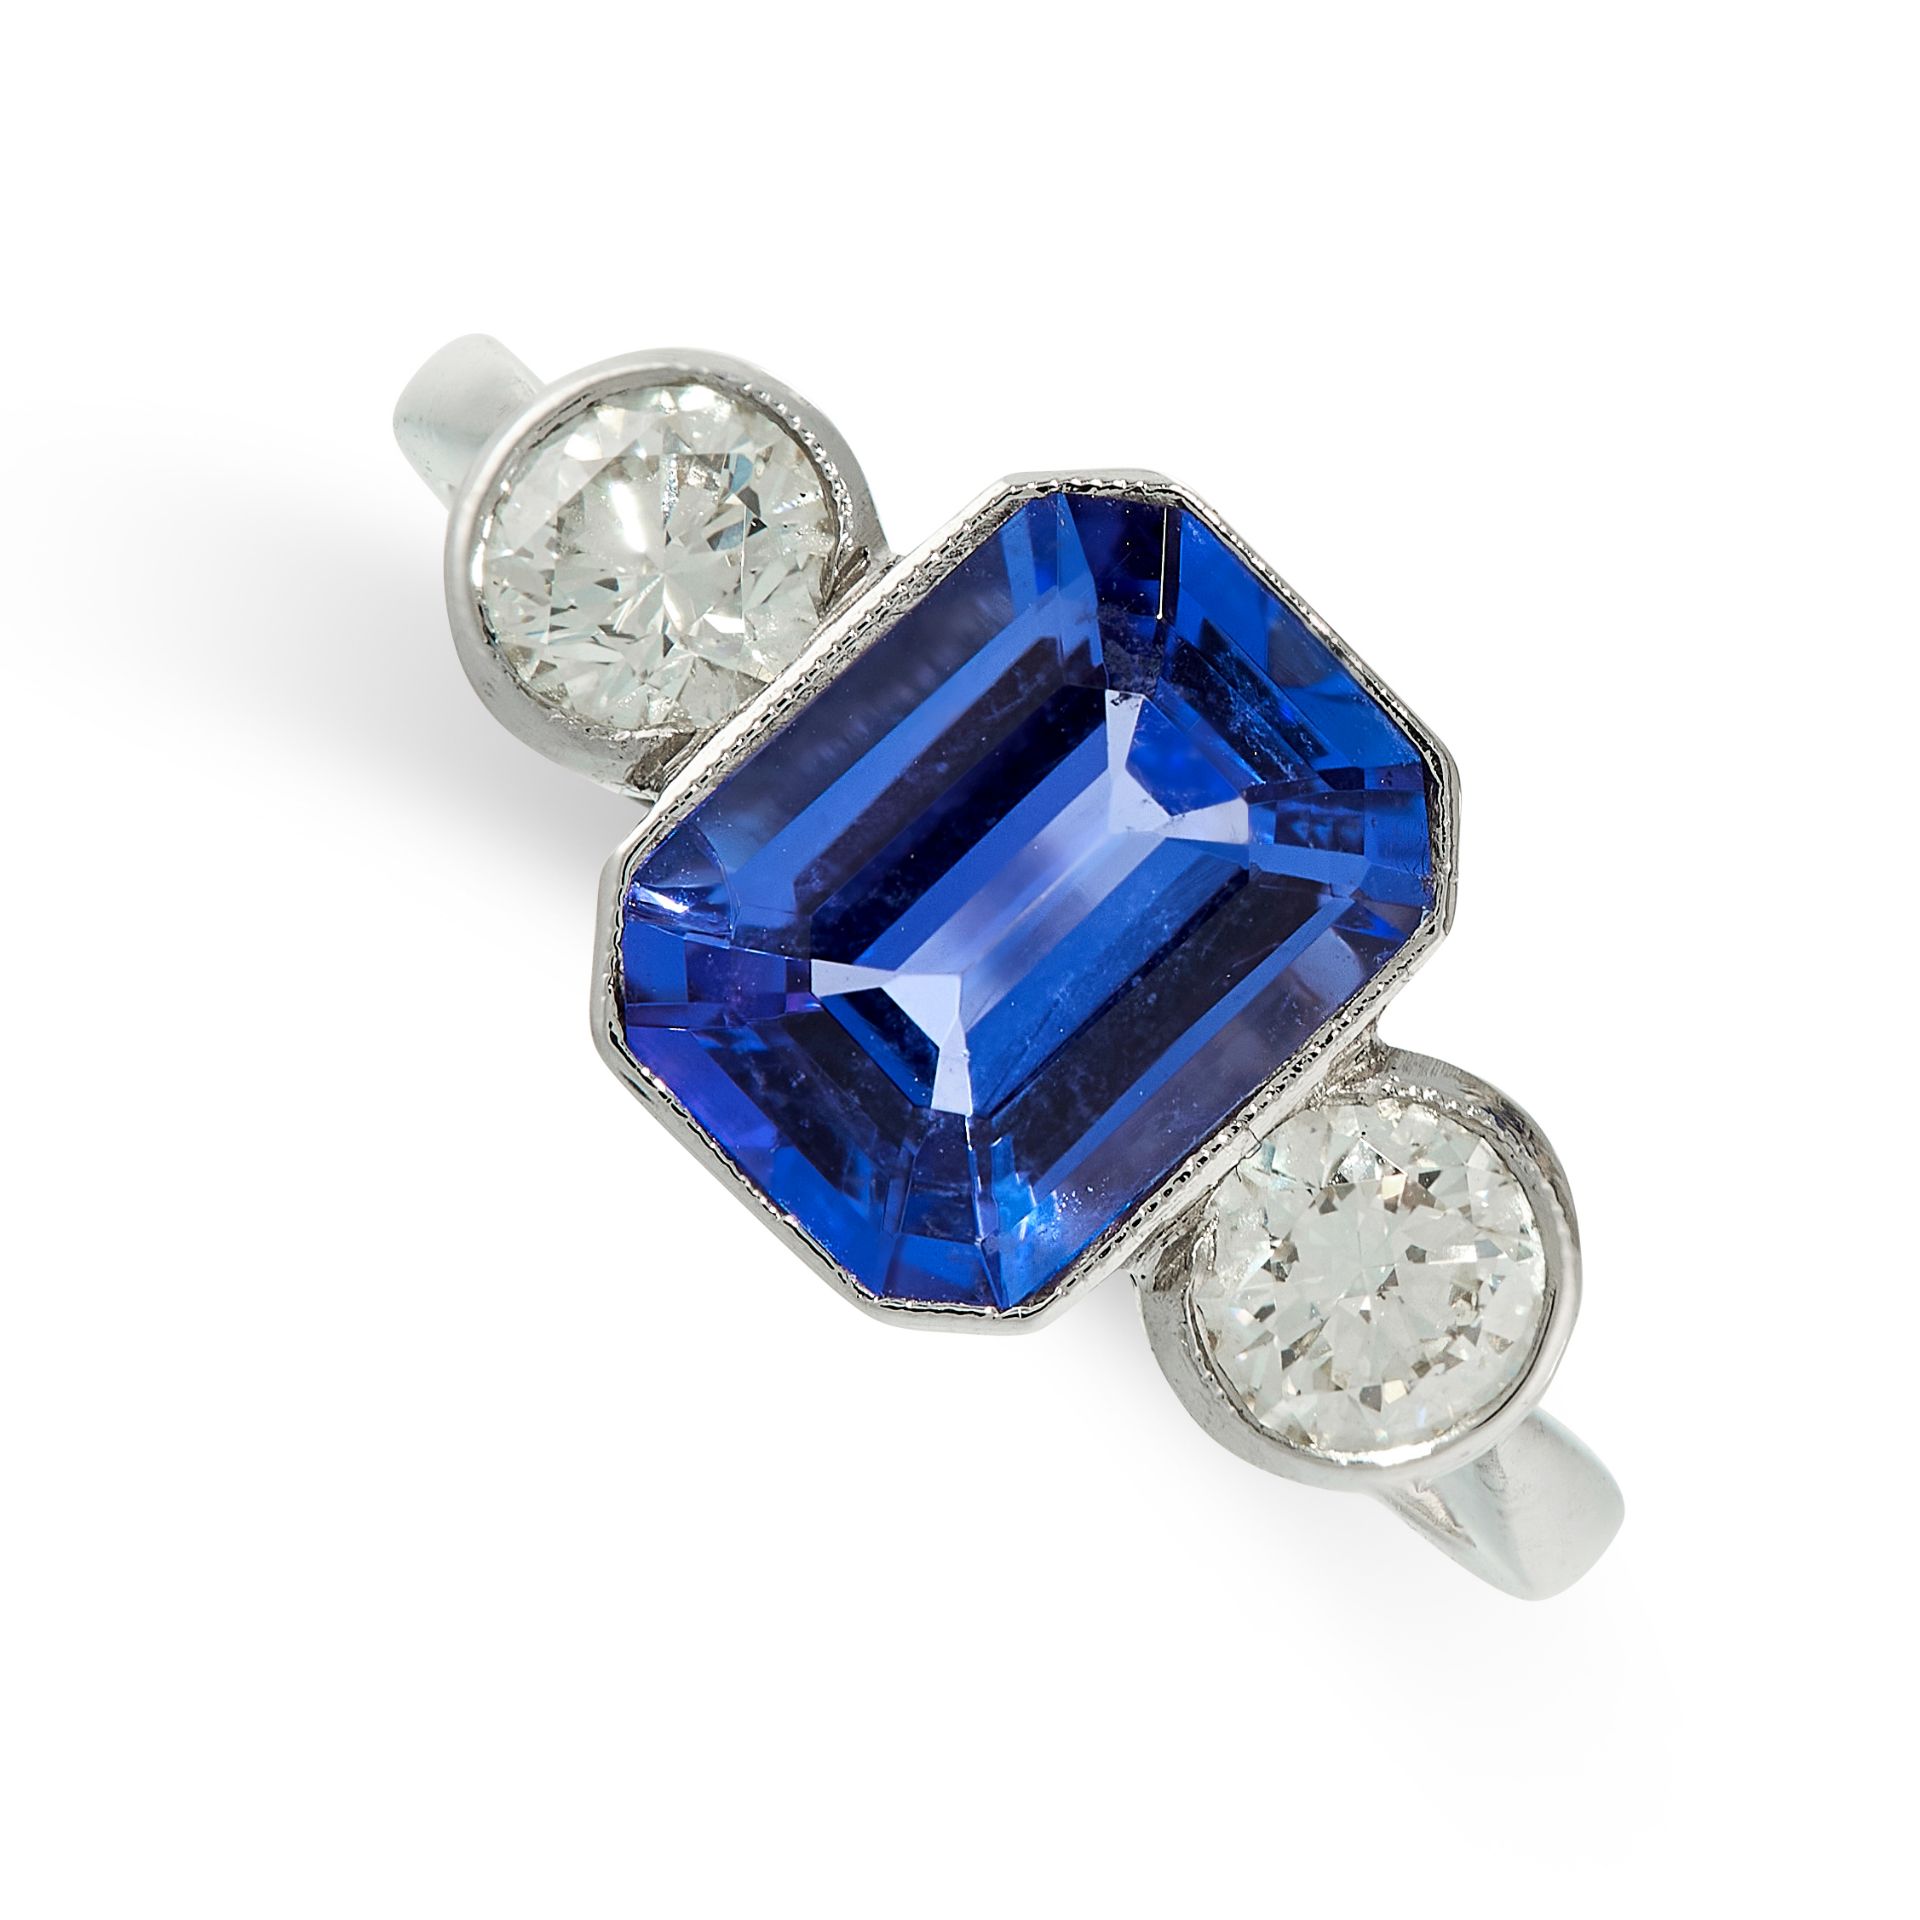 A TANZANITE AND DIAMOND RING in platinum, set with an emerald cut tanzanite of 2.25 carats,